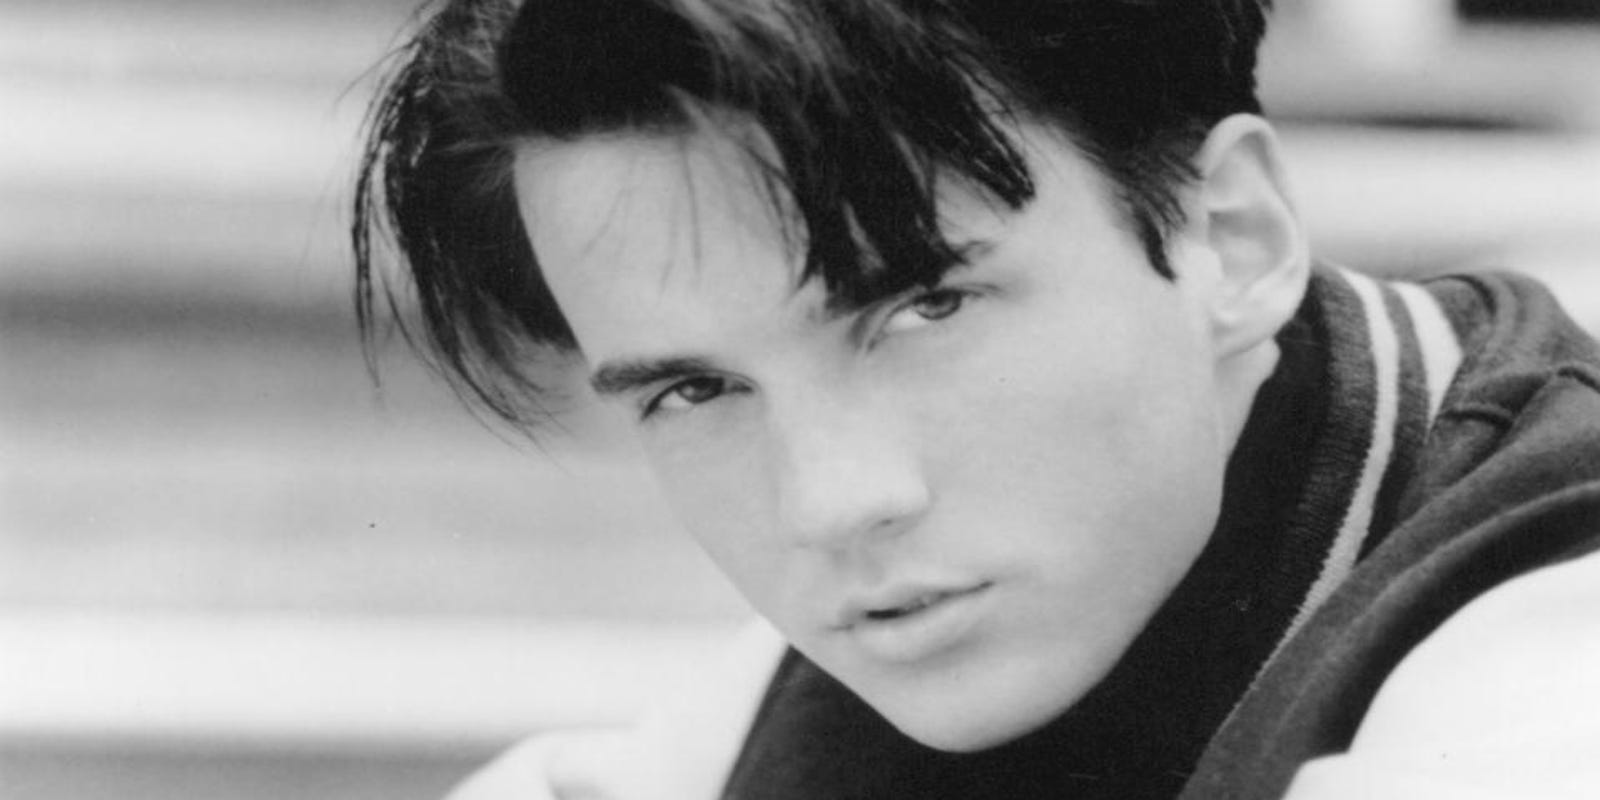 Thin Hairy Nudist Beach Couples - 90s teen idol Tommy Page dies in apparent suicide